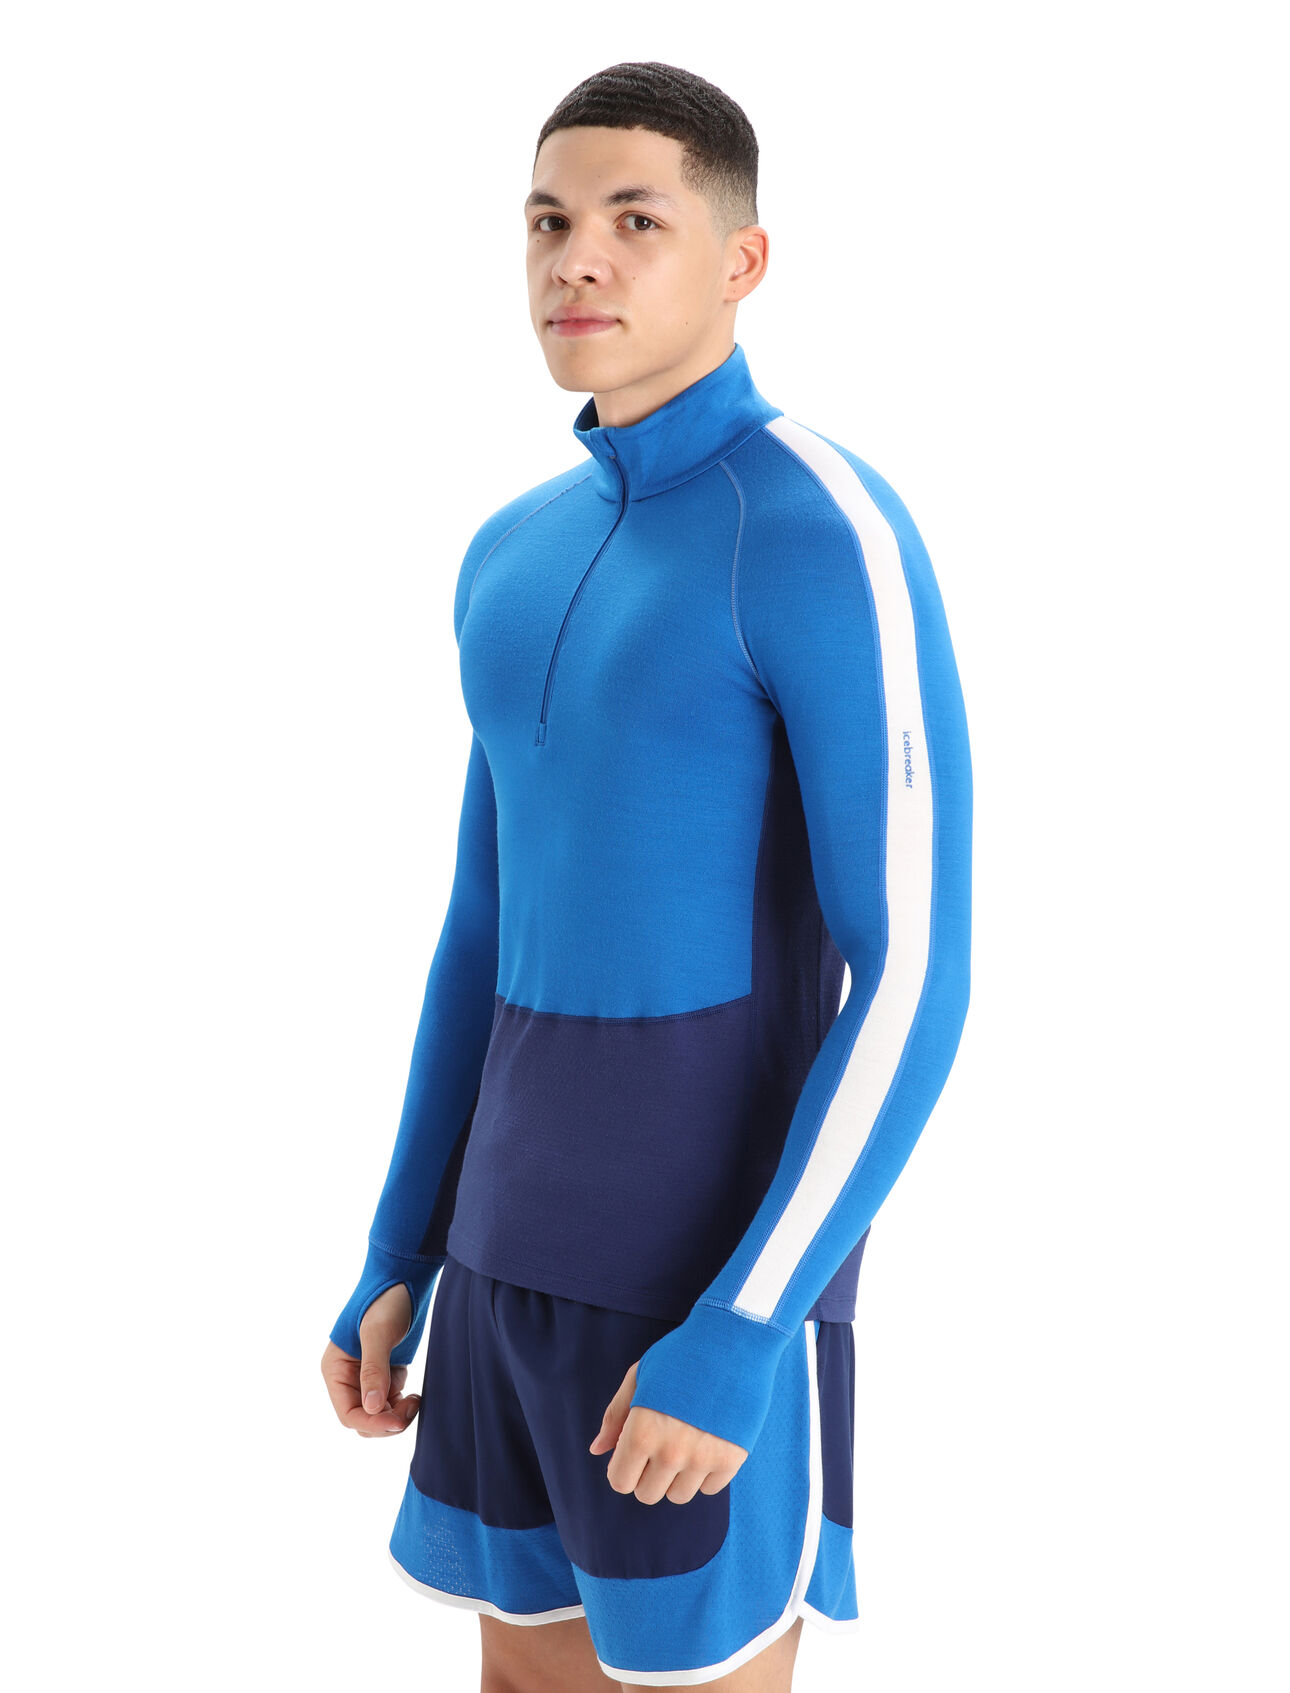 Mens 260 ZoneKnit™ Merino Long Sleeve Half Zip Thermal Top A heavyweight merino base layer top designed to help regulate temperature during high-intensity activity, the 260 ZoneKnit™ Long Sleeve Half Zip feature 100% pure and natural merino wool.